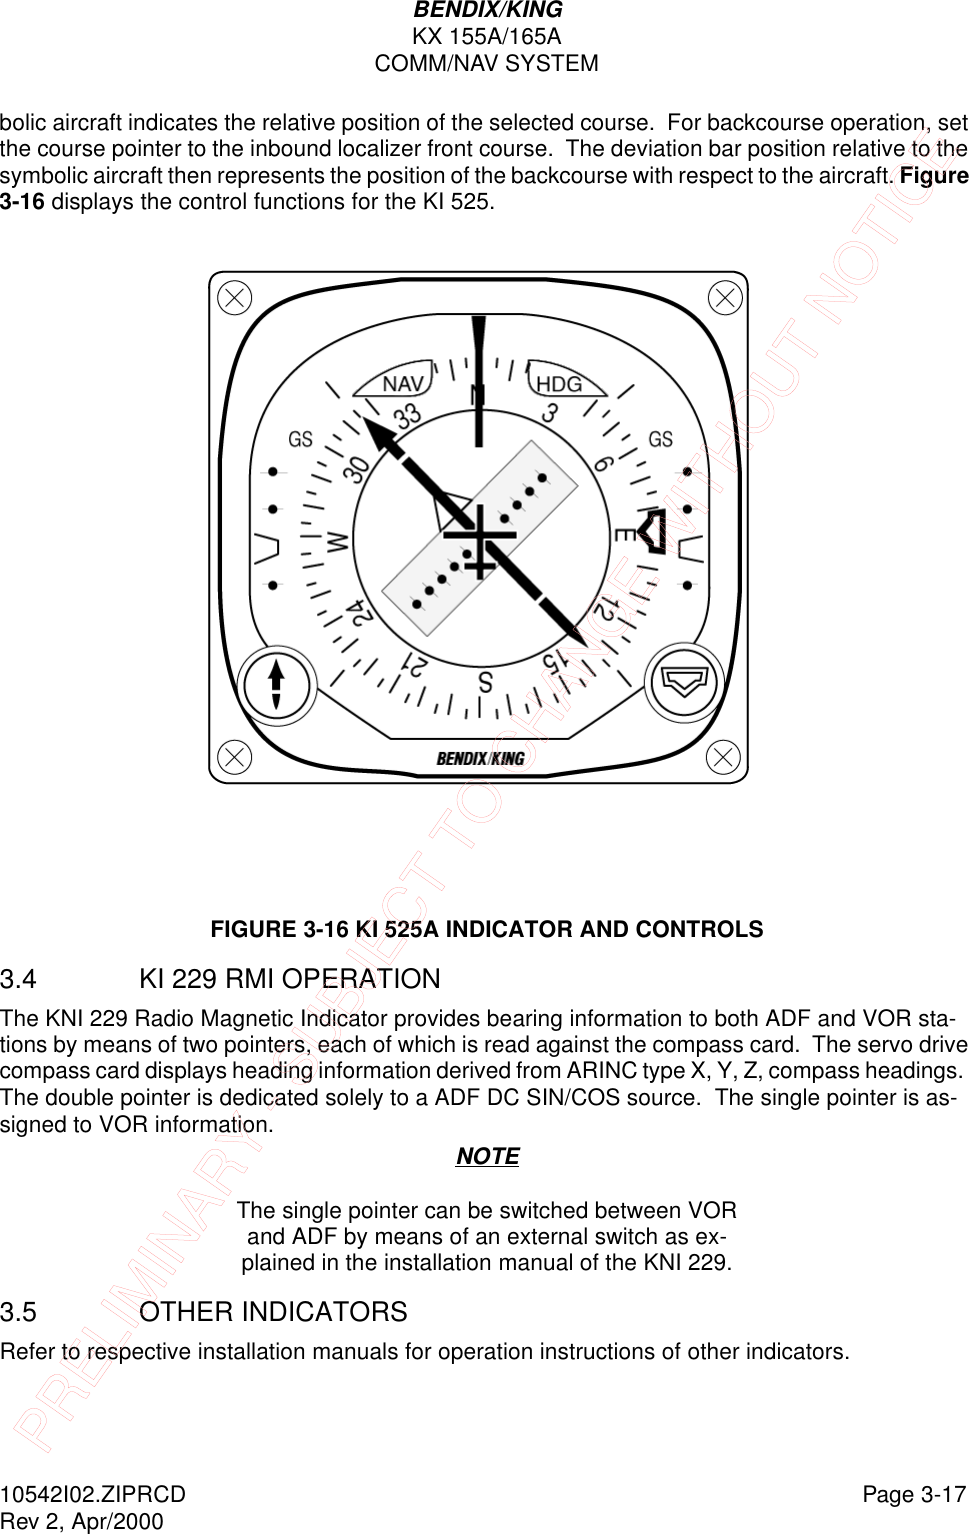 BENDIX/KINGKX 155A/165ACOMM/NAV SYSTEM10542I02.ZIPRCD Page 3-17Rev 2, Apr/2000bolic aircraft indicates the relative position of the selected course.  For backcourse operation, set the course pointer to the inbound localizer front course.  The deviation bar position relative to the symbolic aircraft then represents the position of the backcourse with respect to the aircraft. Figure 3-16 displays the control functions for the KI 525.FIGURE 3-16 KI 525A INDICATOR AND CONTROLS3.4 KI 229 RMI OPERATION The KNI 229 Radio Magnetic Indicator provides bearing information to both ADF and VOR sta-tions by means of two pointers, each of which is read against the compass card.  The servo drive compass card displays heading information derived from ARINC type X, Y, Z, compass headings.  The double pointer is dedicated solely to a ADF DC SIN/COS source.  The single pointer is as-signed to VOR information.NOTEThe single pointer can be switched between VOR and ADF by means of an external switch as ex-plained in the installation manual of the KNI 229.3.5 OTHER INDICATORSRefer to respective installation manuals for operation instructions of other indicators.PRELIMINARY - SUBJECT TO CHANGE WITHOUT NOTICE